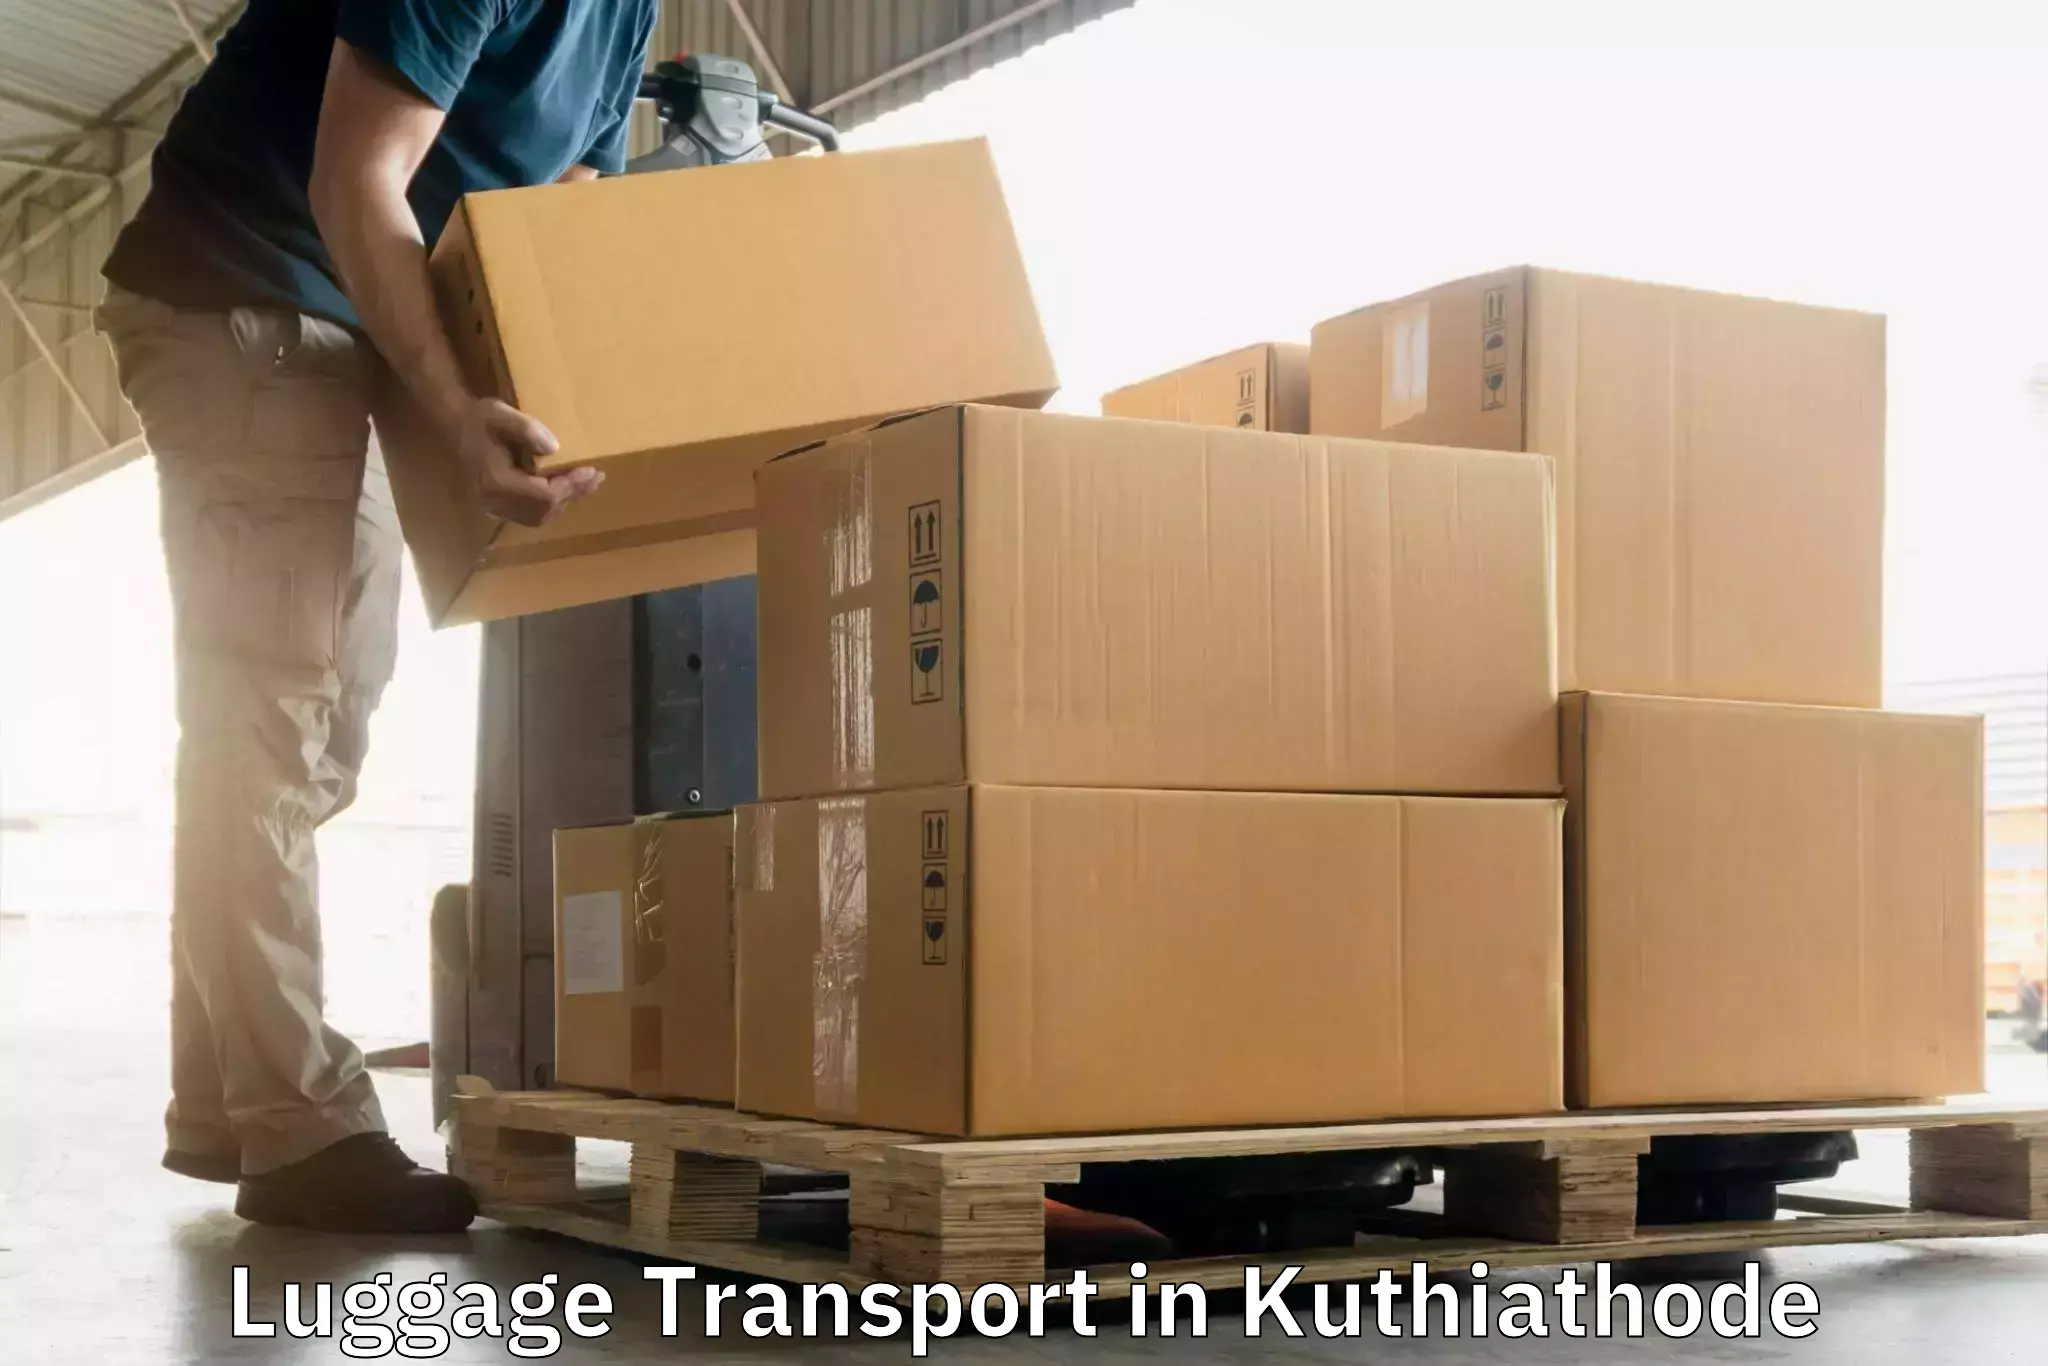 Corporate baggage transport in Kuthiathode